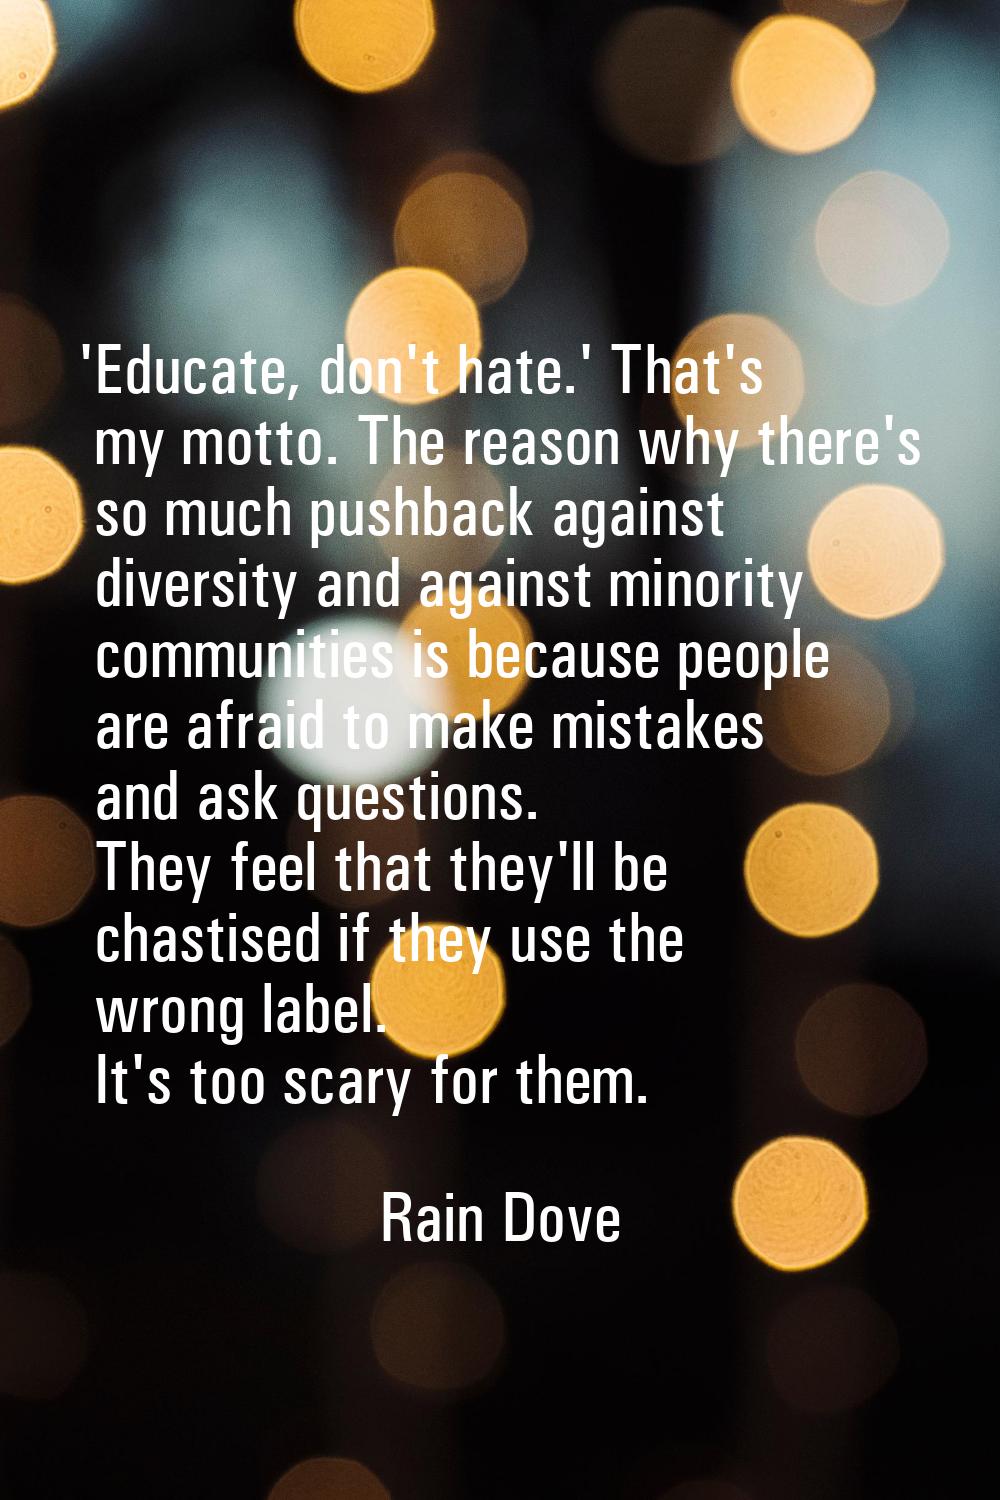 'Educate, don't hate.' That's my motto. The reason why there's so much pushback against diversity a